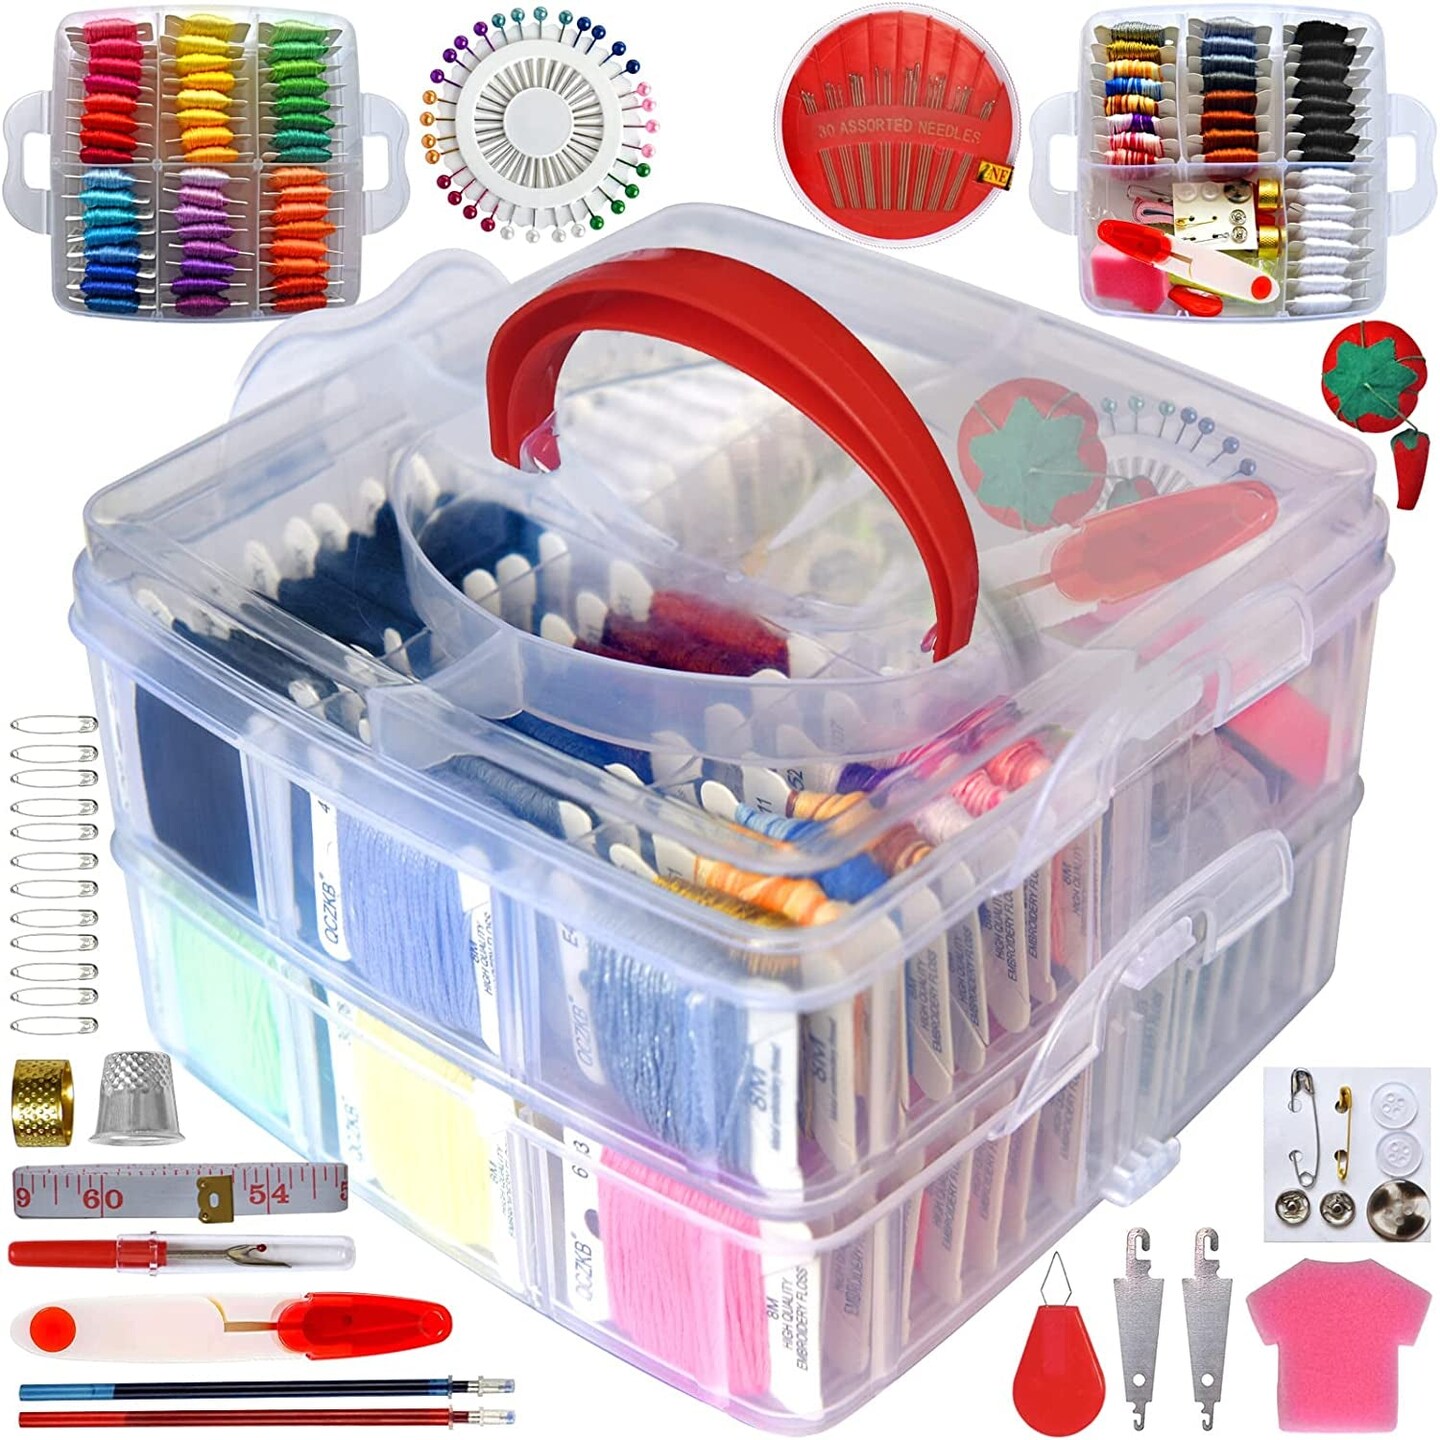 embroidery floss storage